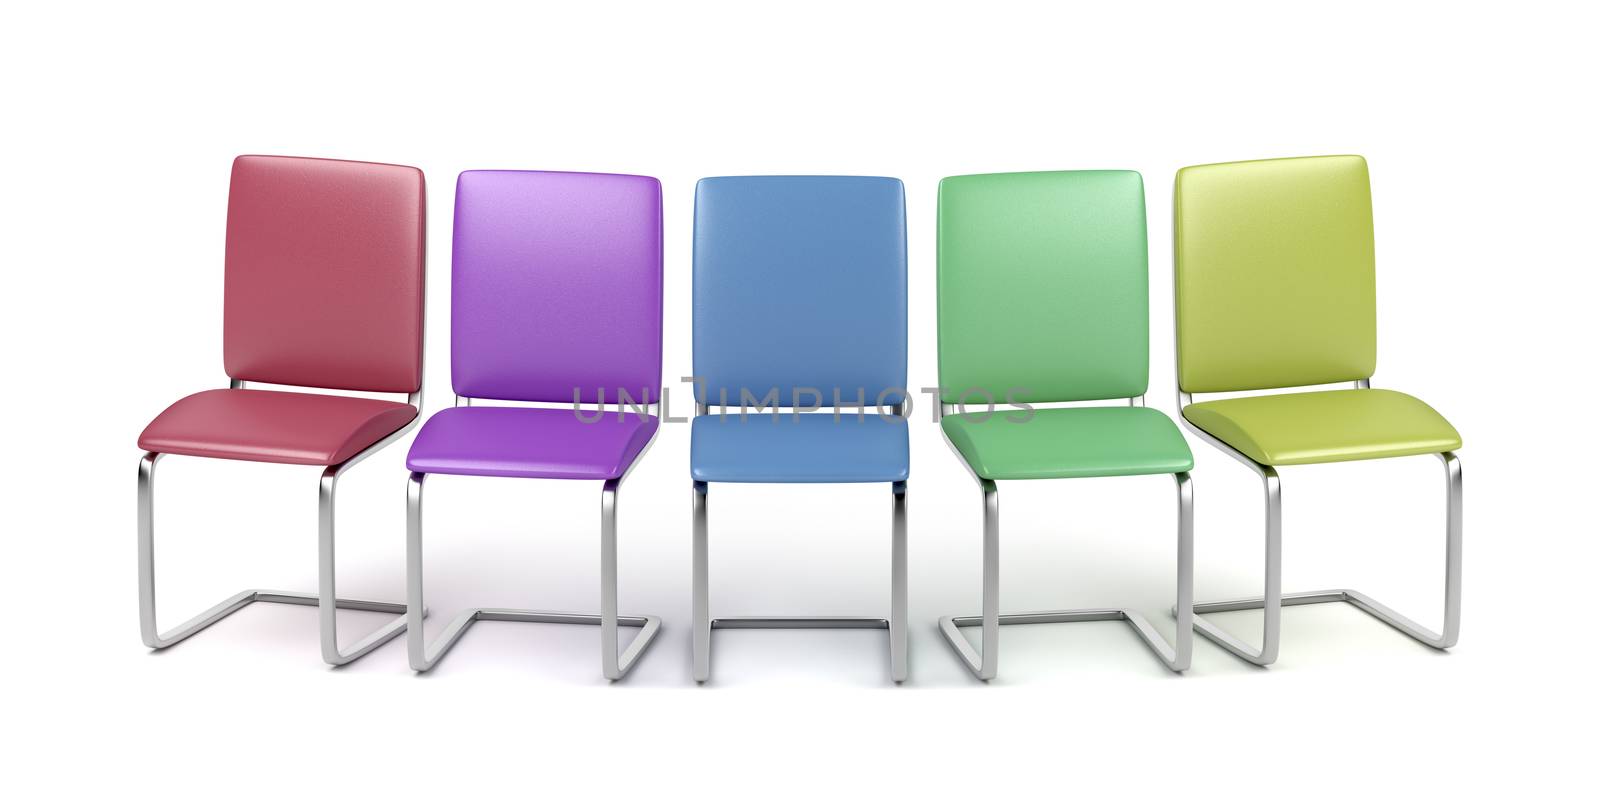 Colorful dining chairs by magraphics